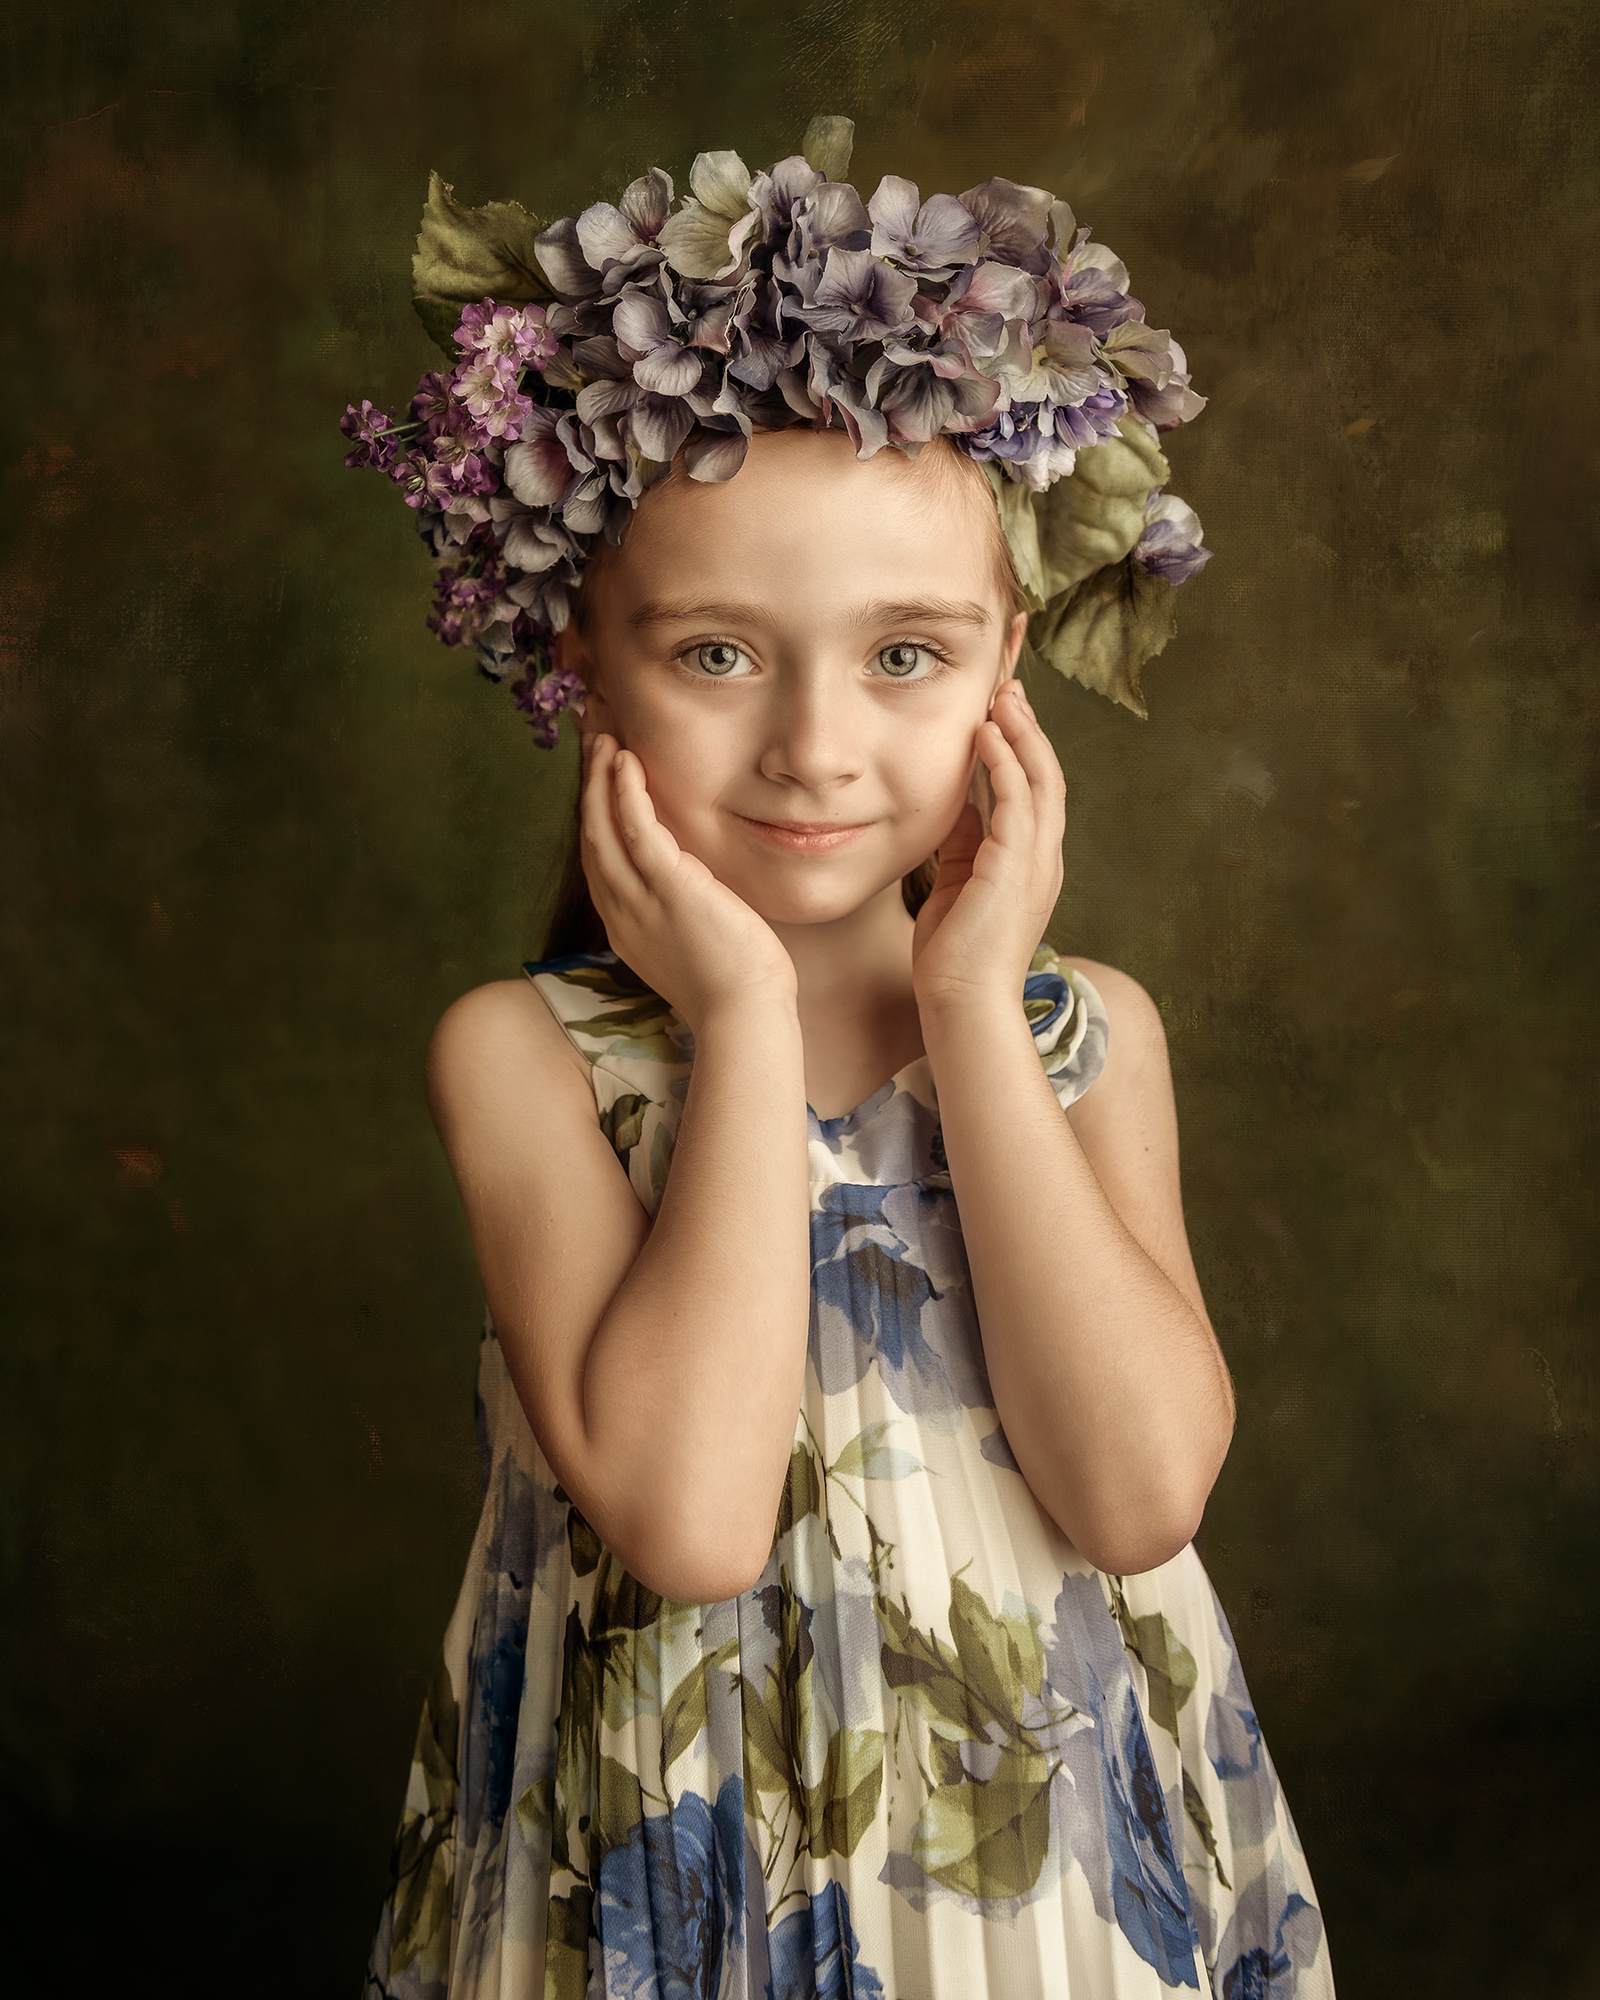 Young-girl-in-a-floral-crown